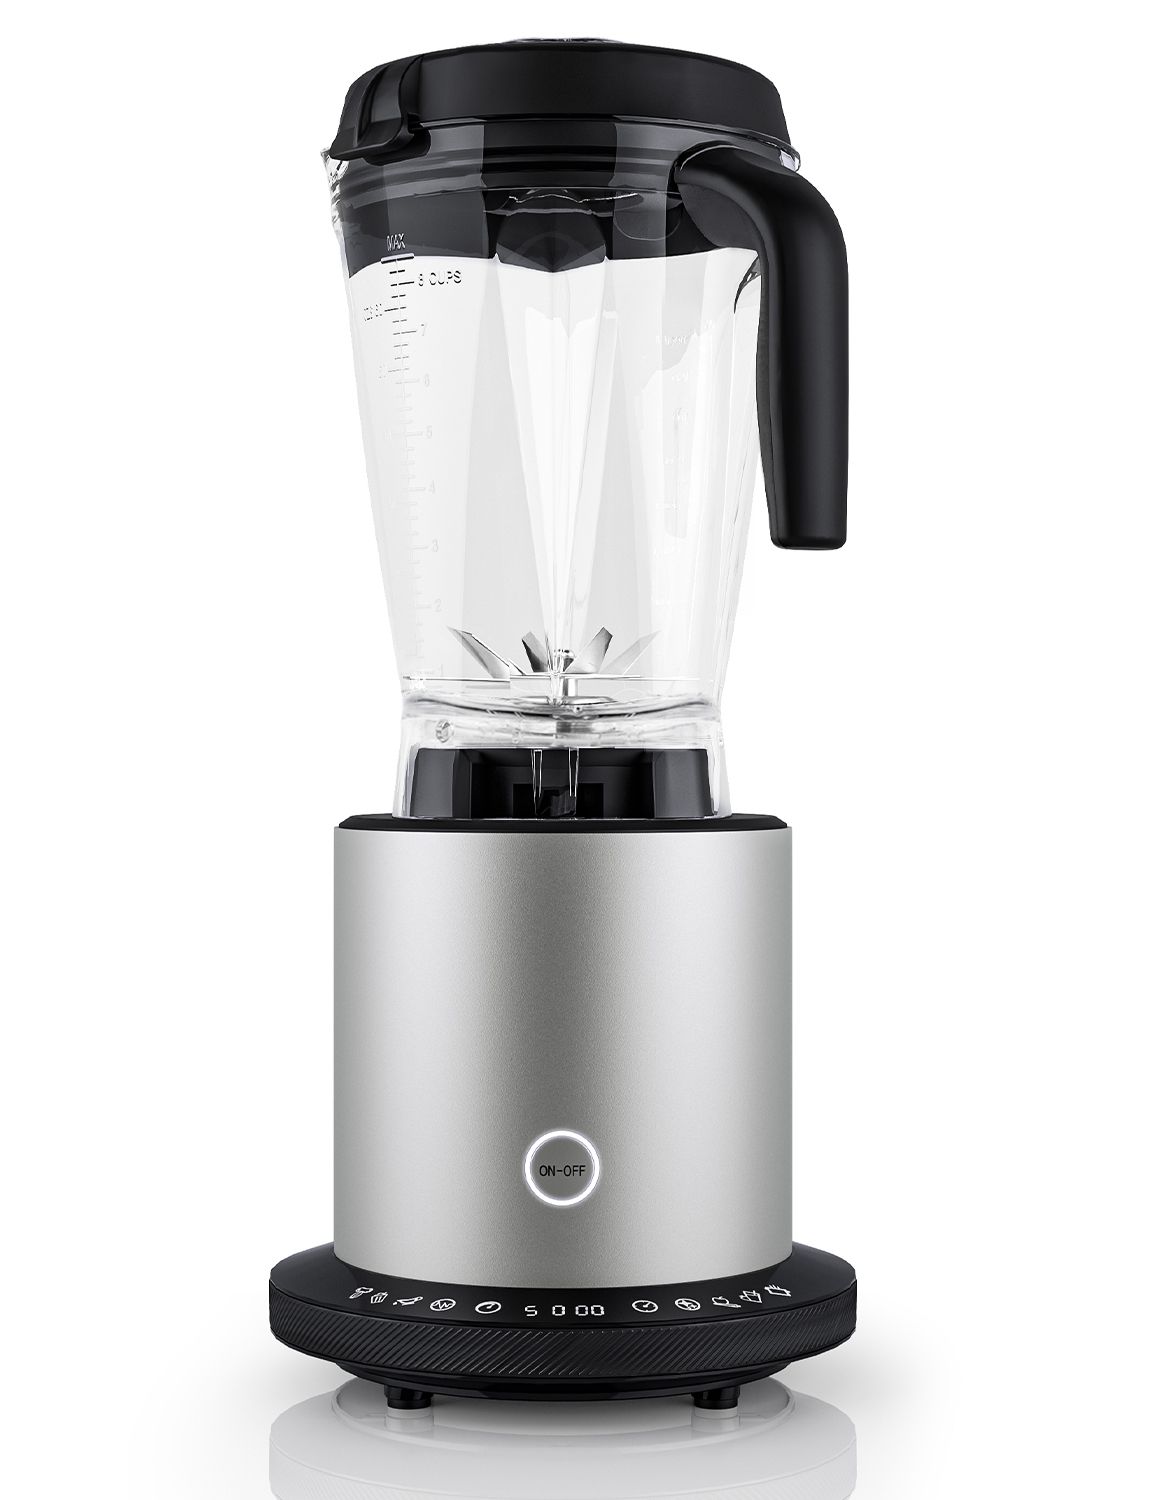 Nutribullet 1,200W Blender Combo with to-go cups up to $50 off at $100  shipped